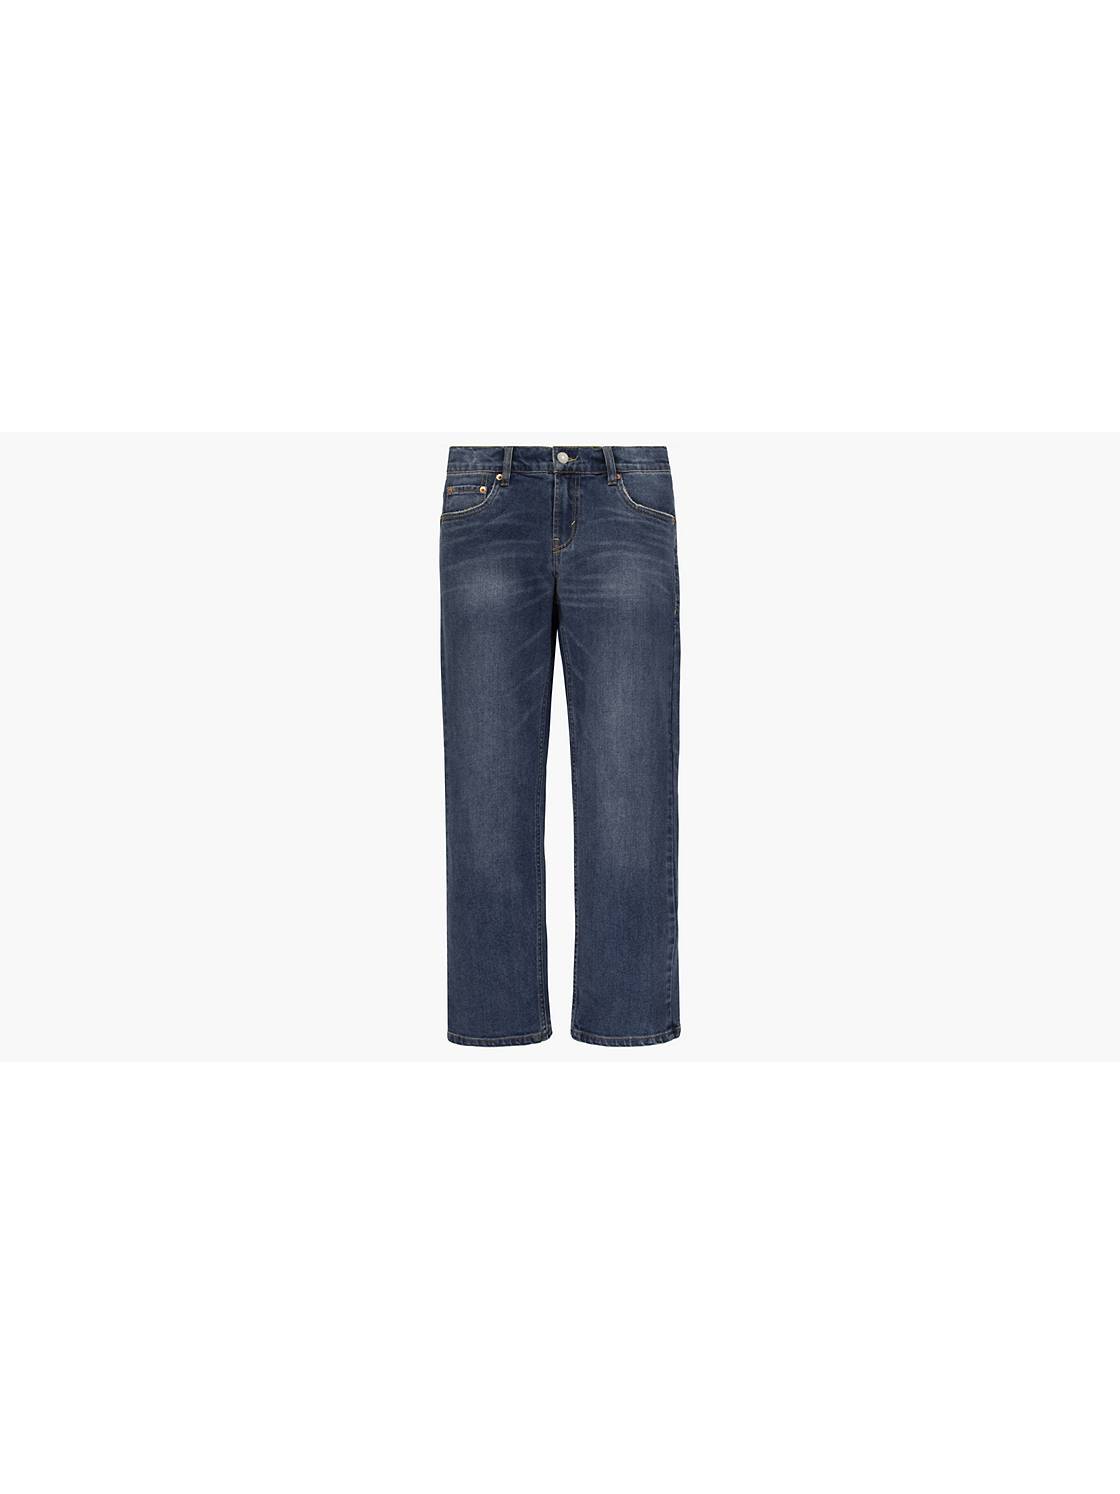 Kids' 551z™ Authentic Straight 16 Clothing | Levi's® US